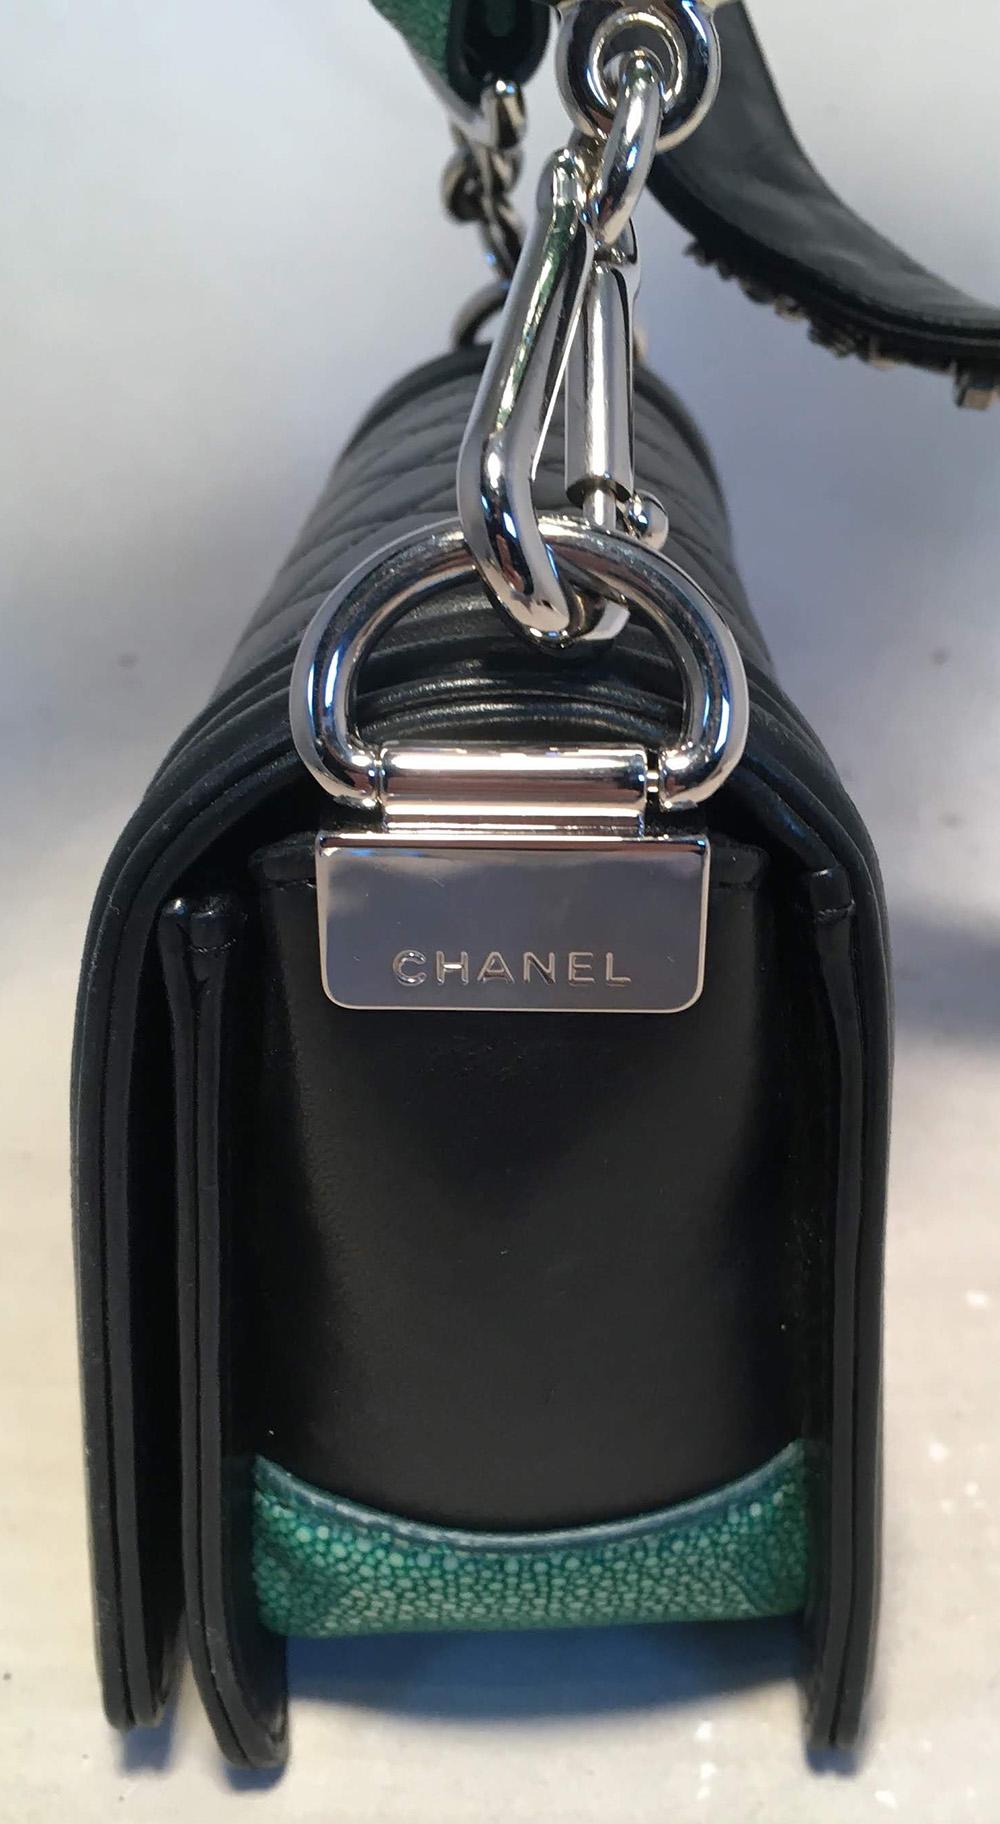 Chanel Black Mini Leather & Galuchat Le Boy Bag with Studded Strap in excellent condition. Black leather exterior with green stingray/galuchat sides and silver hardware. Unique removable wide leather studded shoulder strap with green galuchat ends